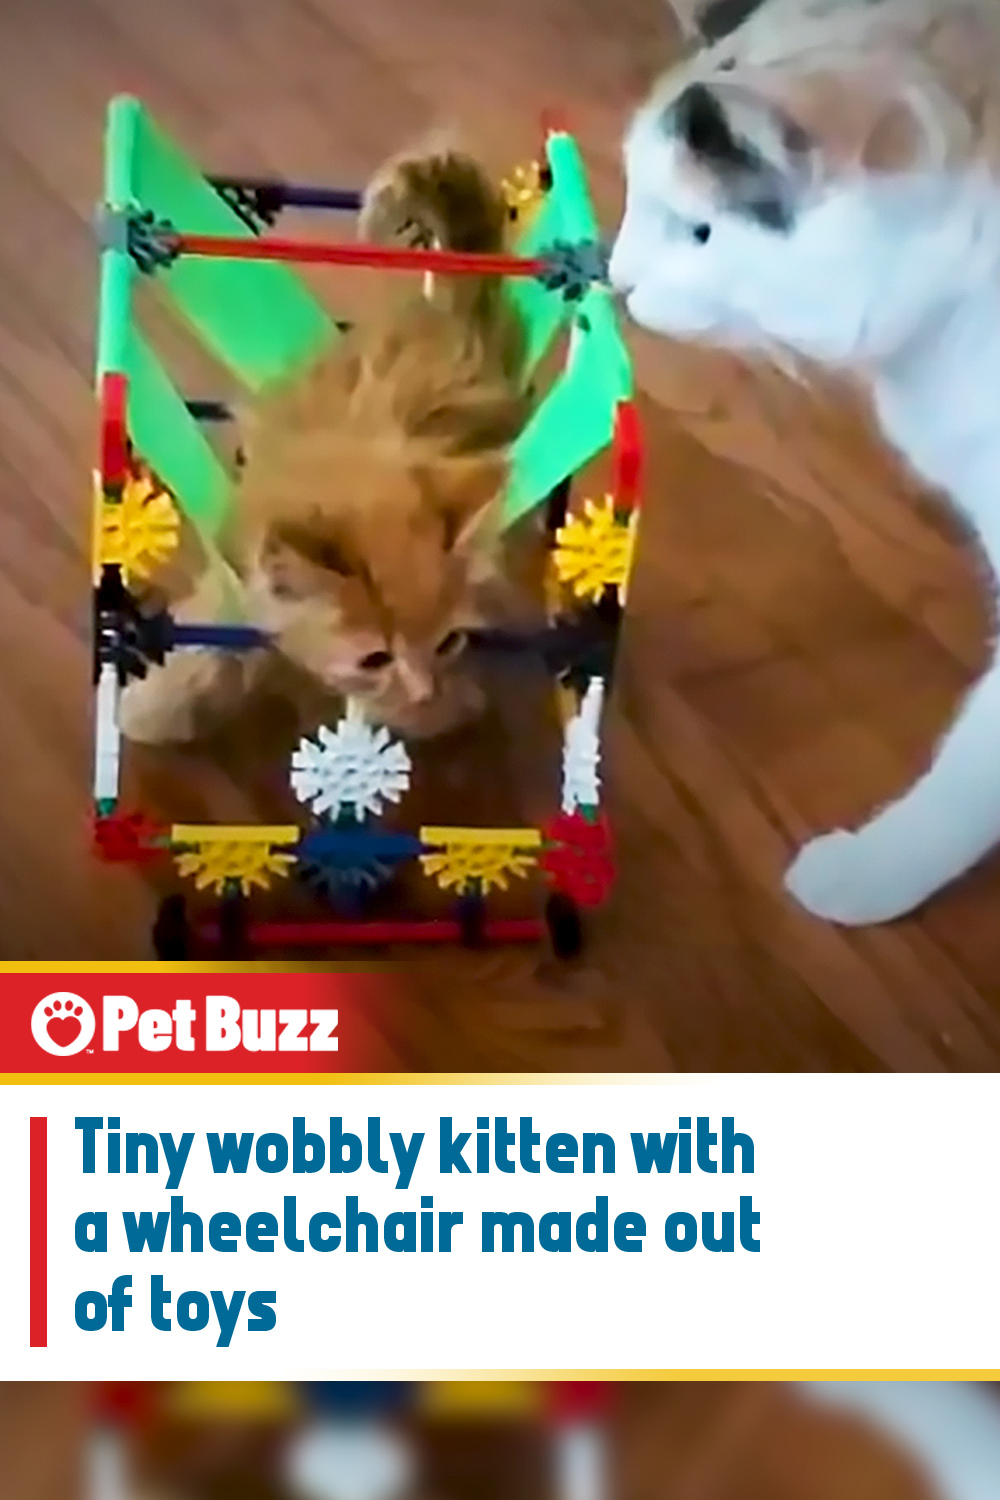 Tiny wobbly kitten with a wheelchair made out of toys